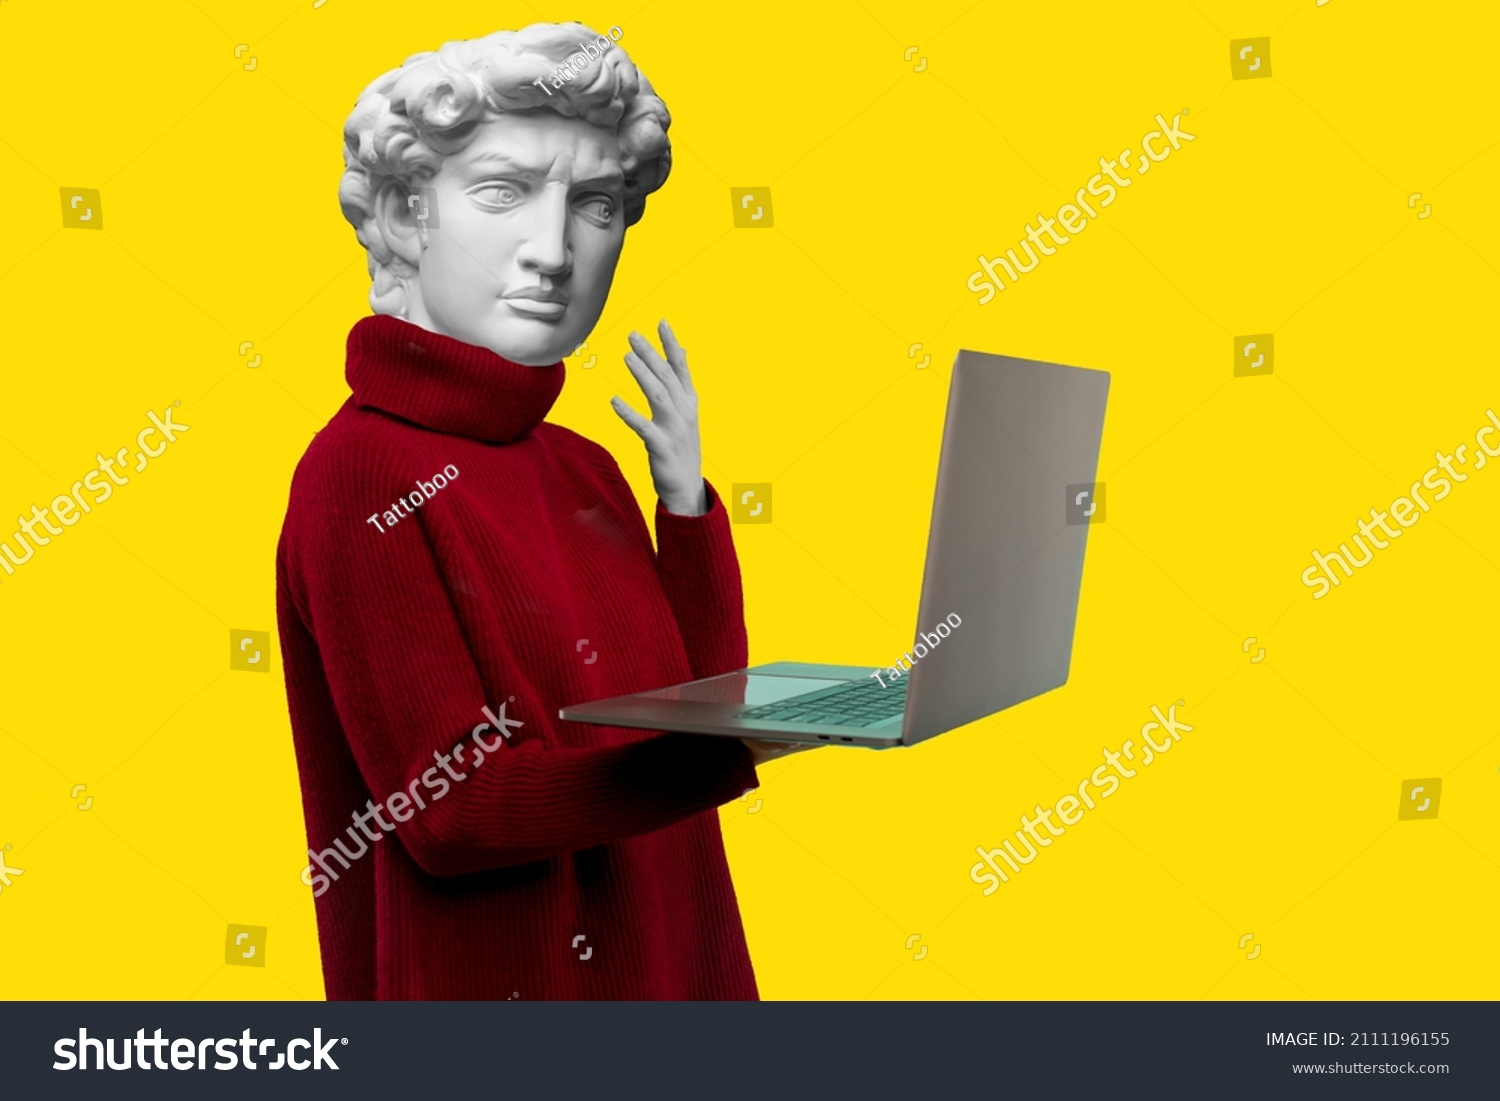 Abstract modern collage. The man with the plaster head of David in a red sweater looks at a laptop screen on a yellow background #2111196155